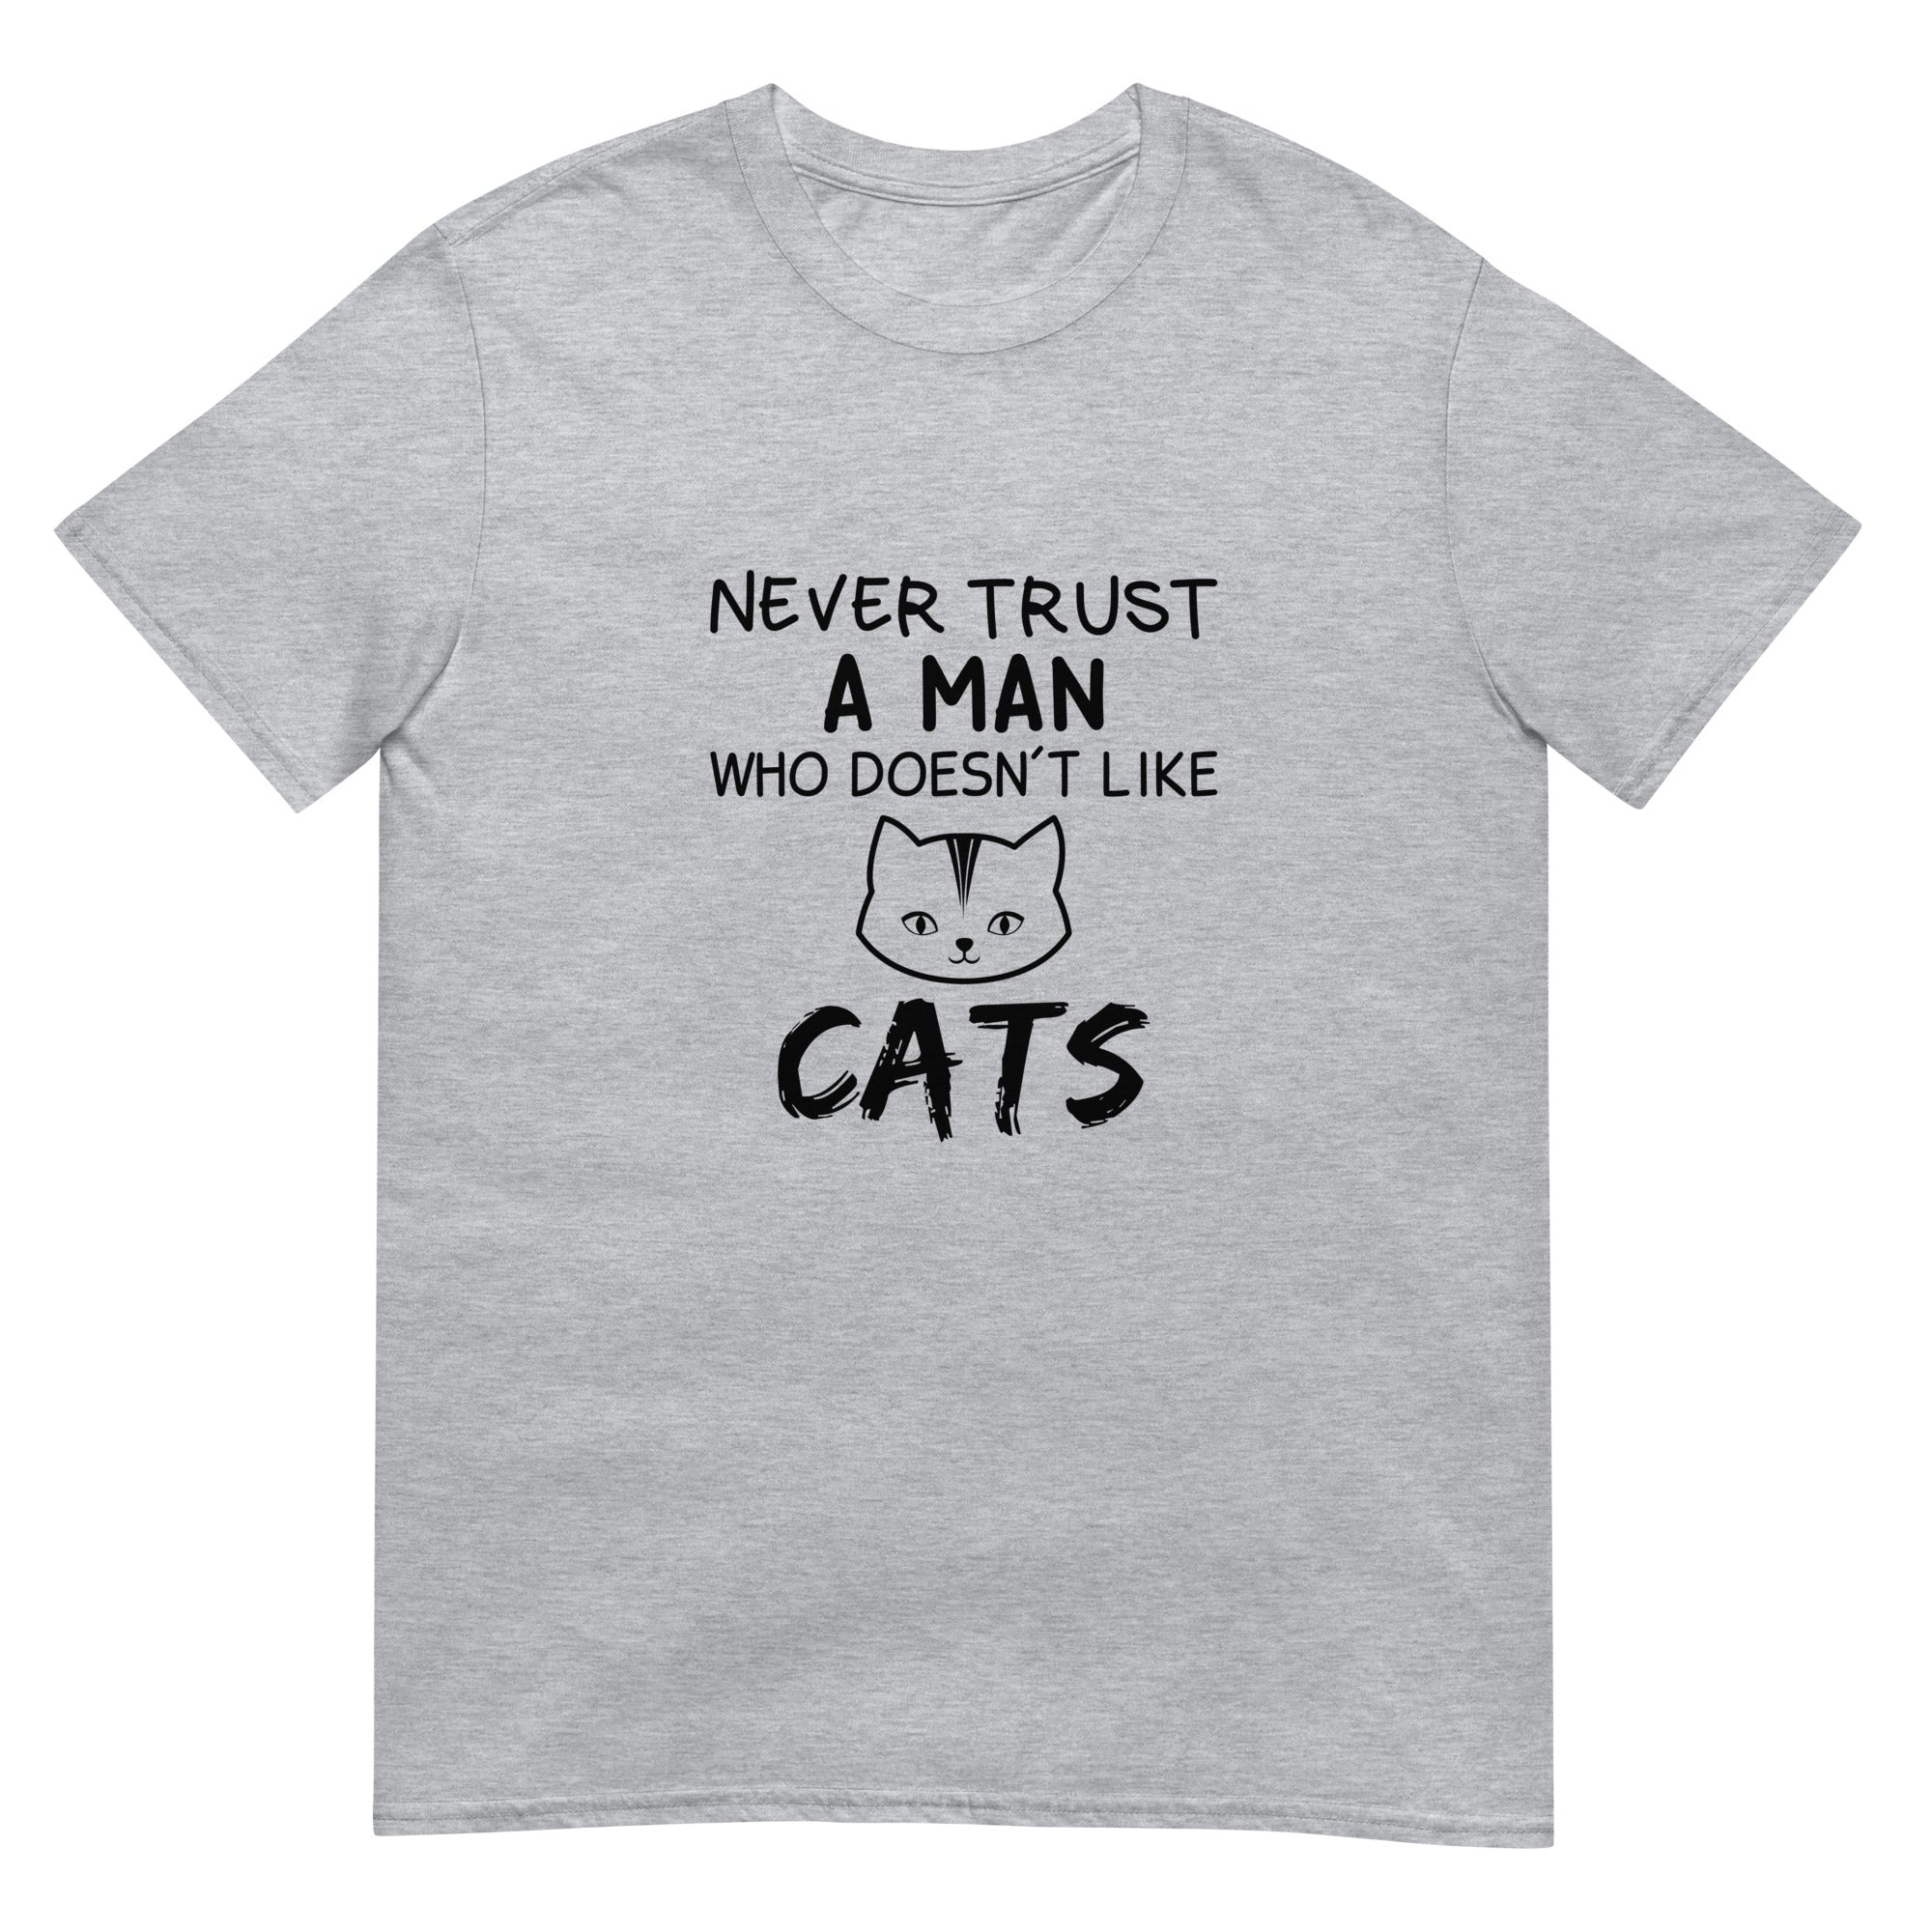 Never Trust a Man Who Doesn't Like Cats Short-Sleeve Unisex T-Shirt